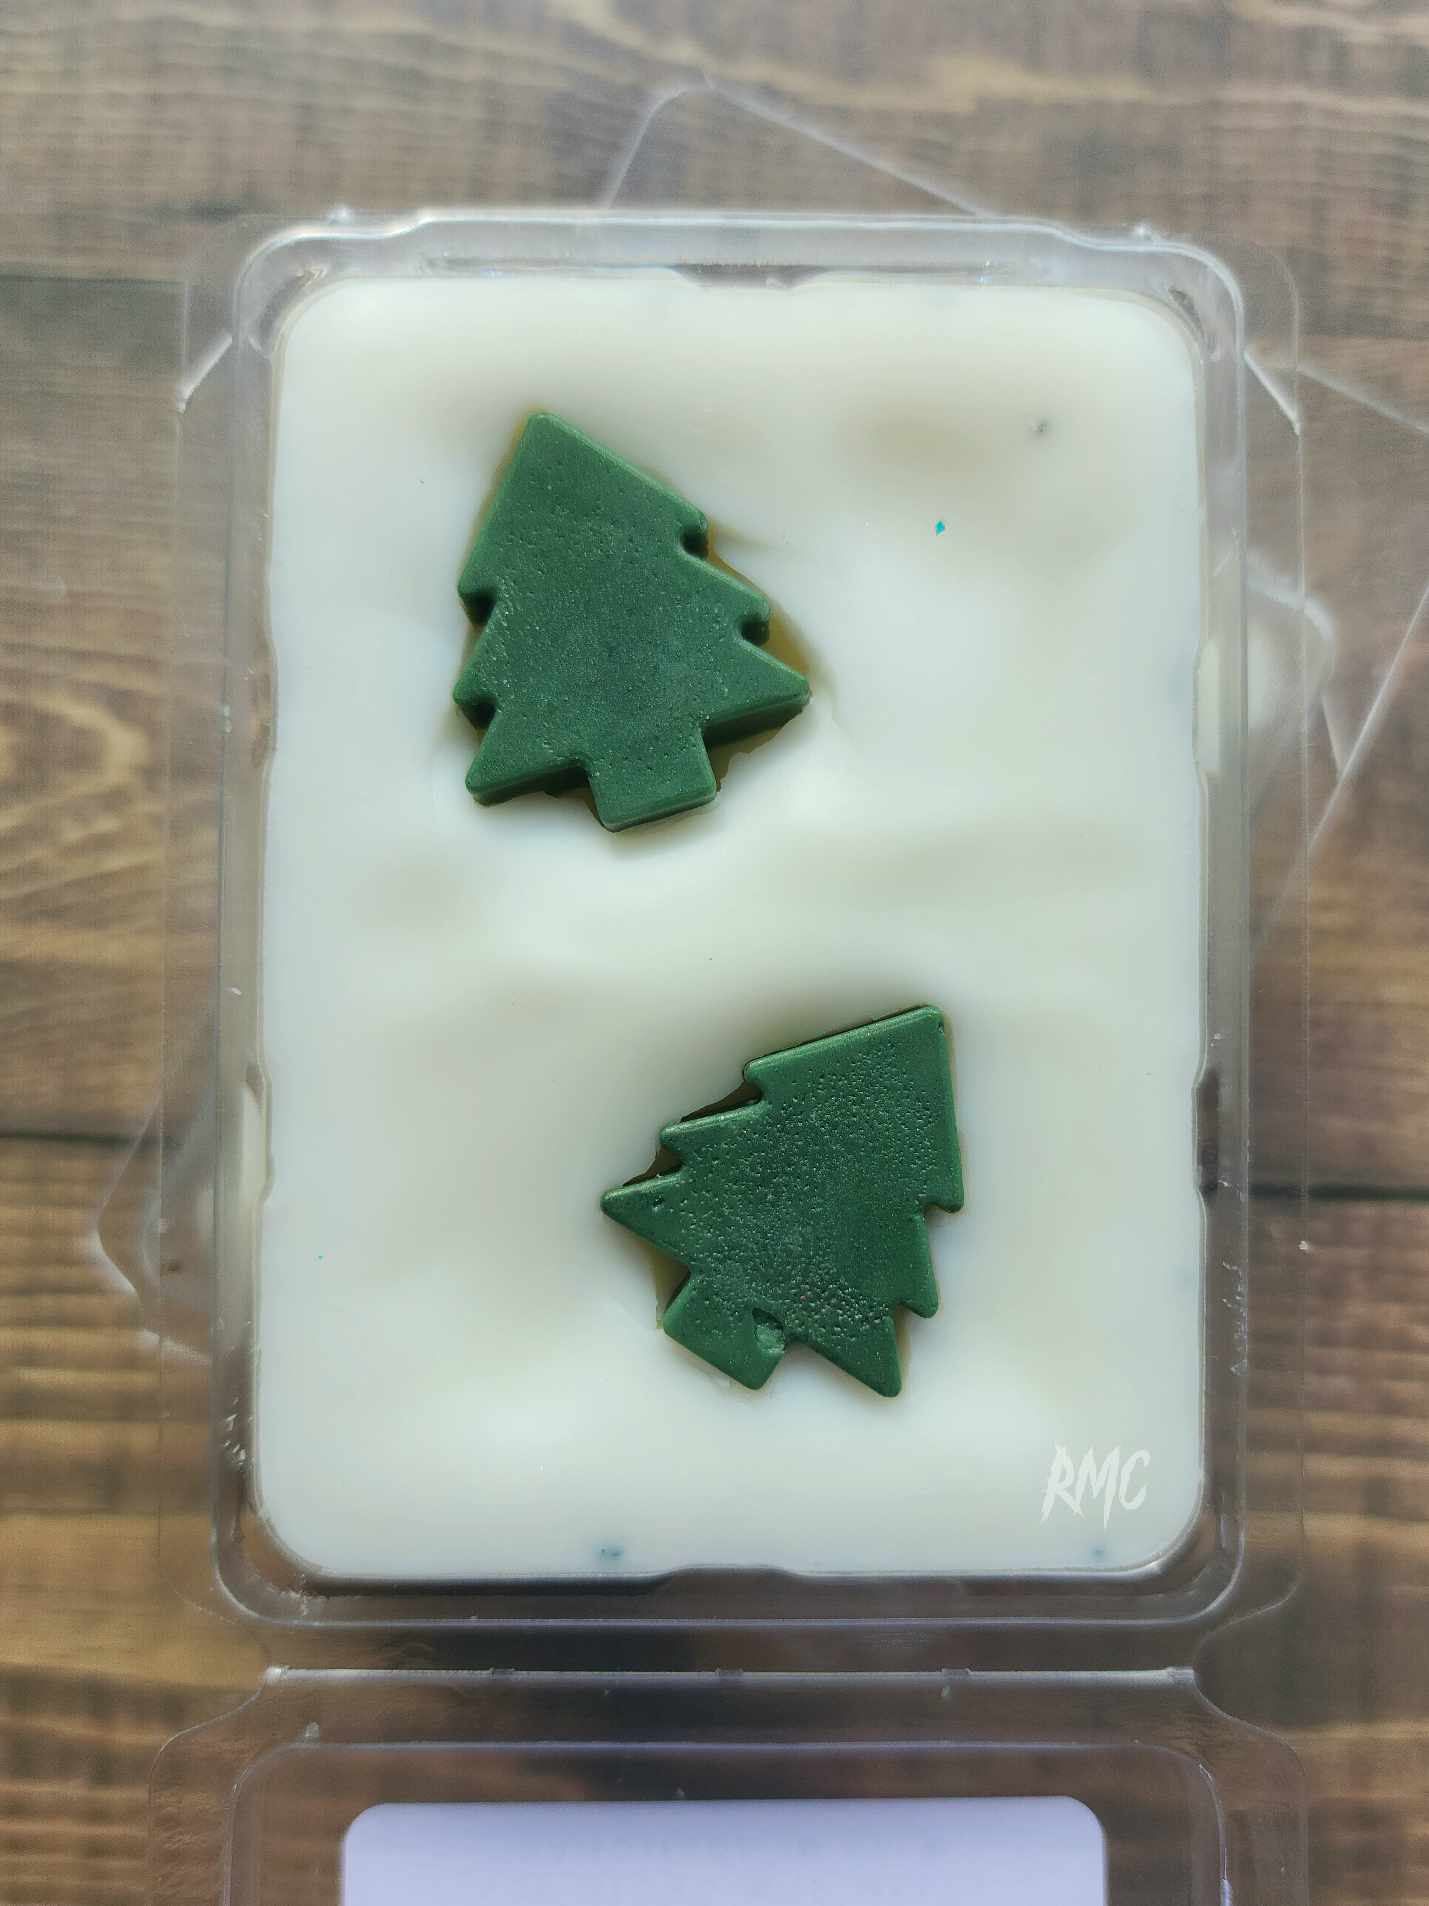 Oh, Christmas Tree | Holiday Clamshell Wax Melts